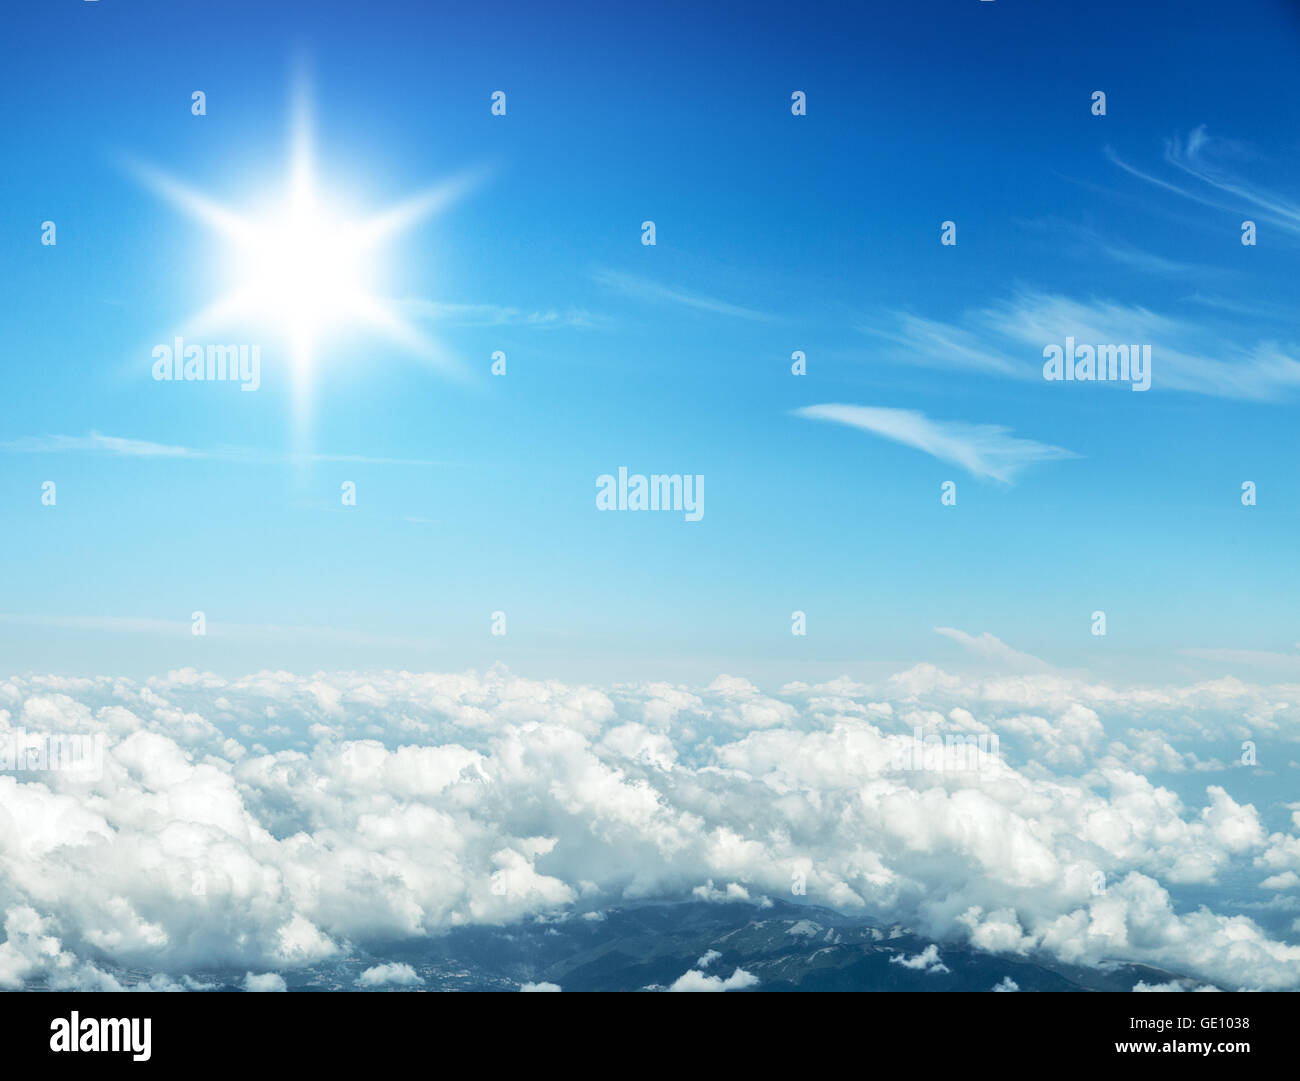 Aerial view of clouds and landscape under them. Stock Photo